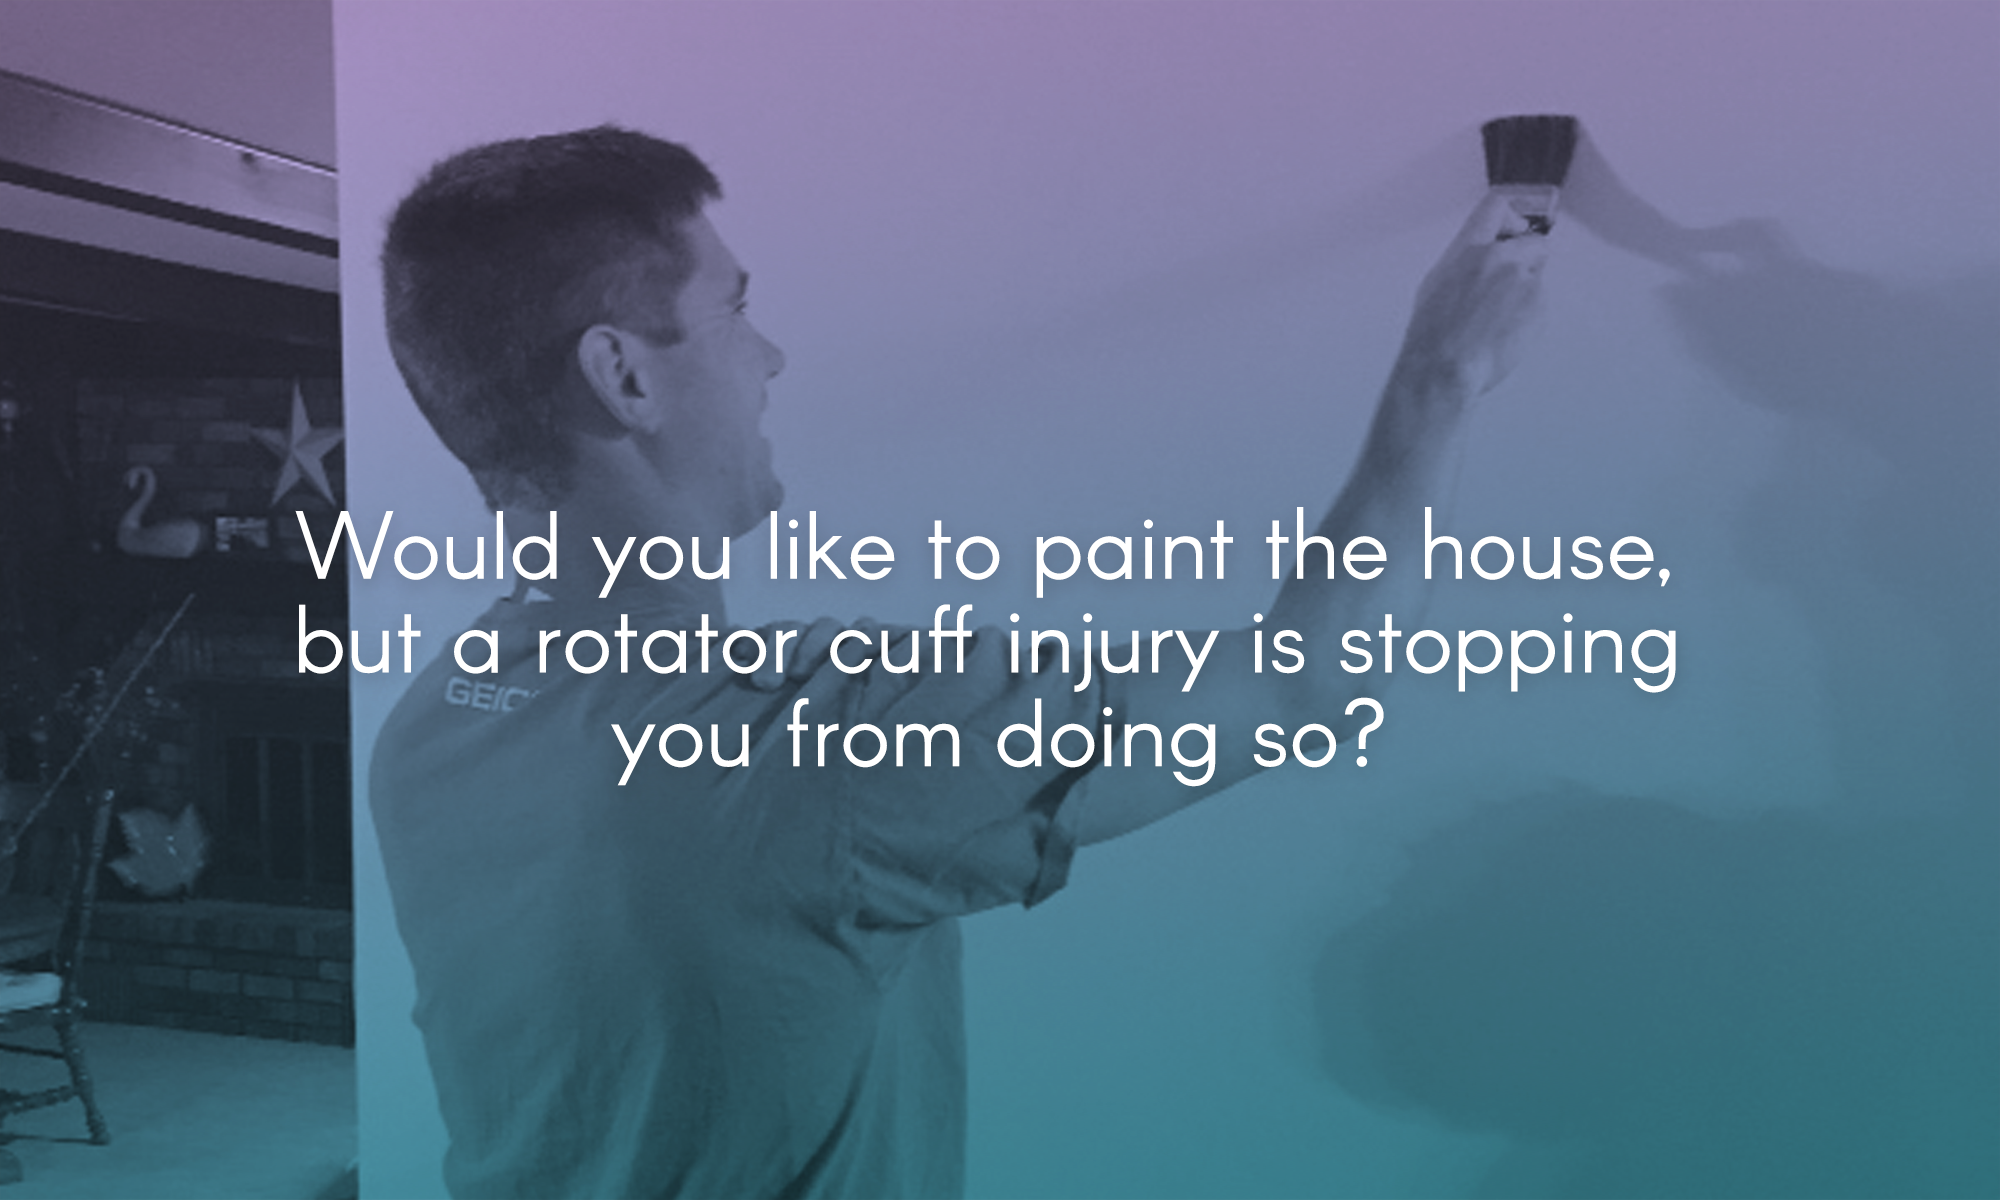  Would you like to paint the house, but a rotator cuff injury is stopping you from doing so? 